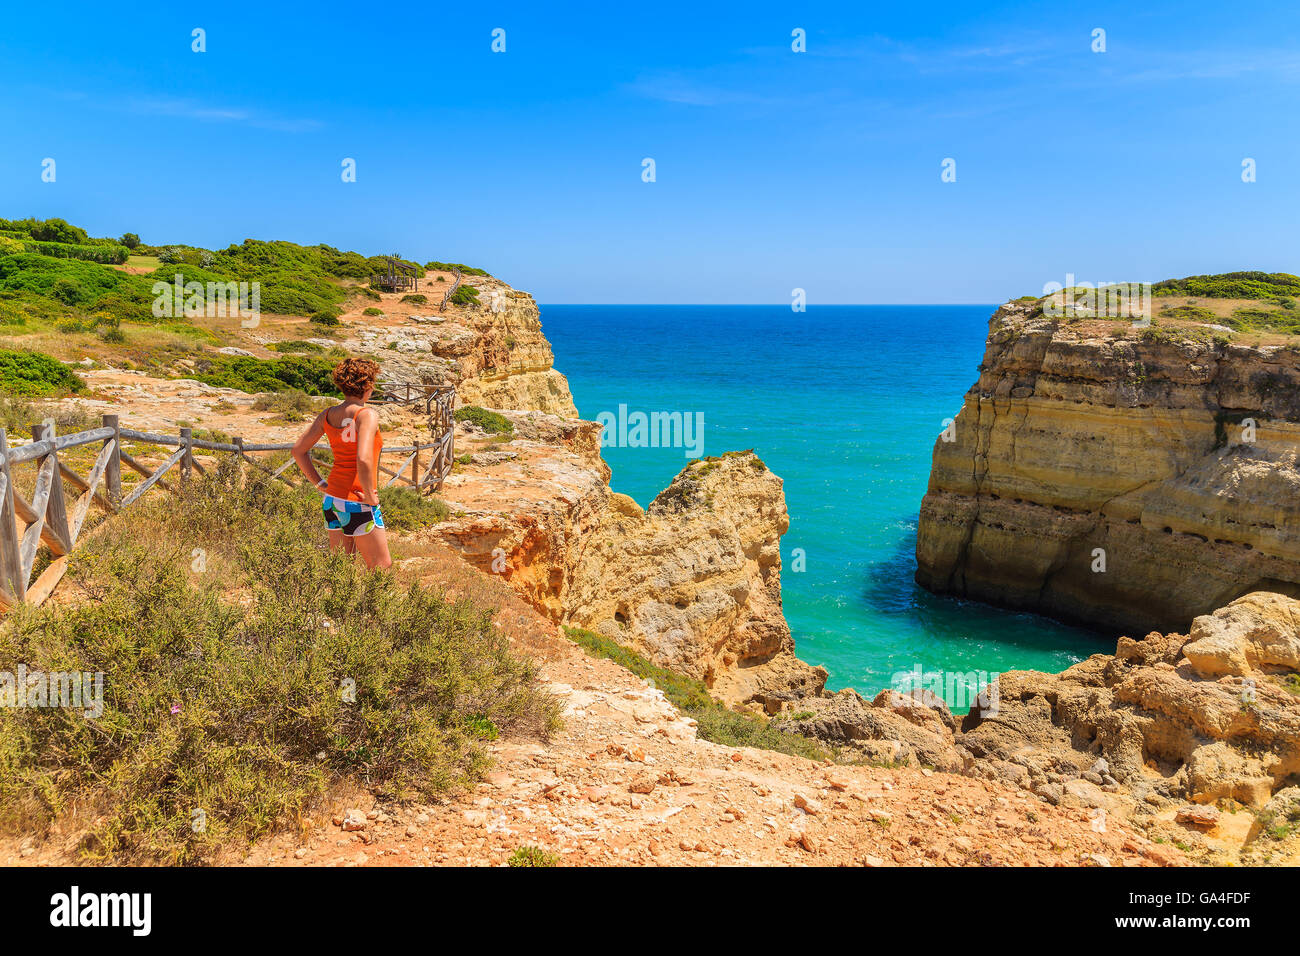 Young woman tourist standing on cliff rock and looking at sea on coast of Portugal, Algarve region Stock Photo